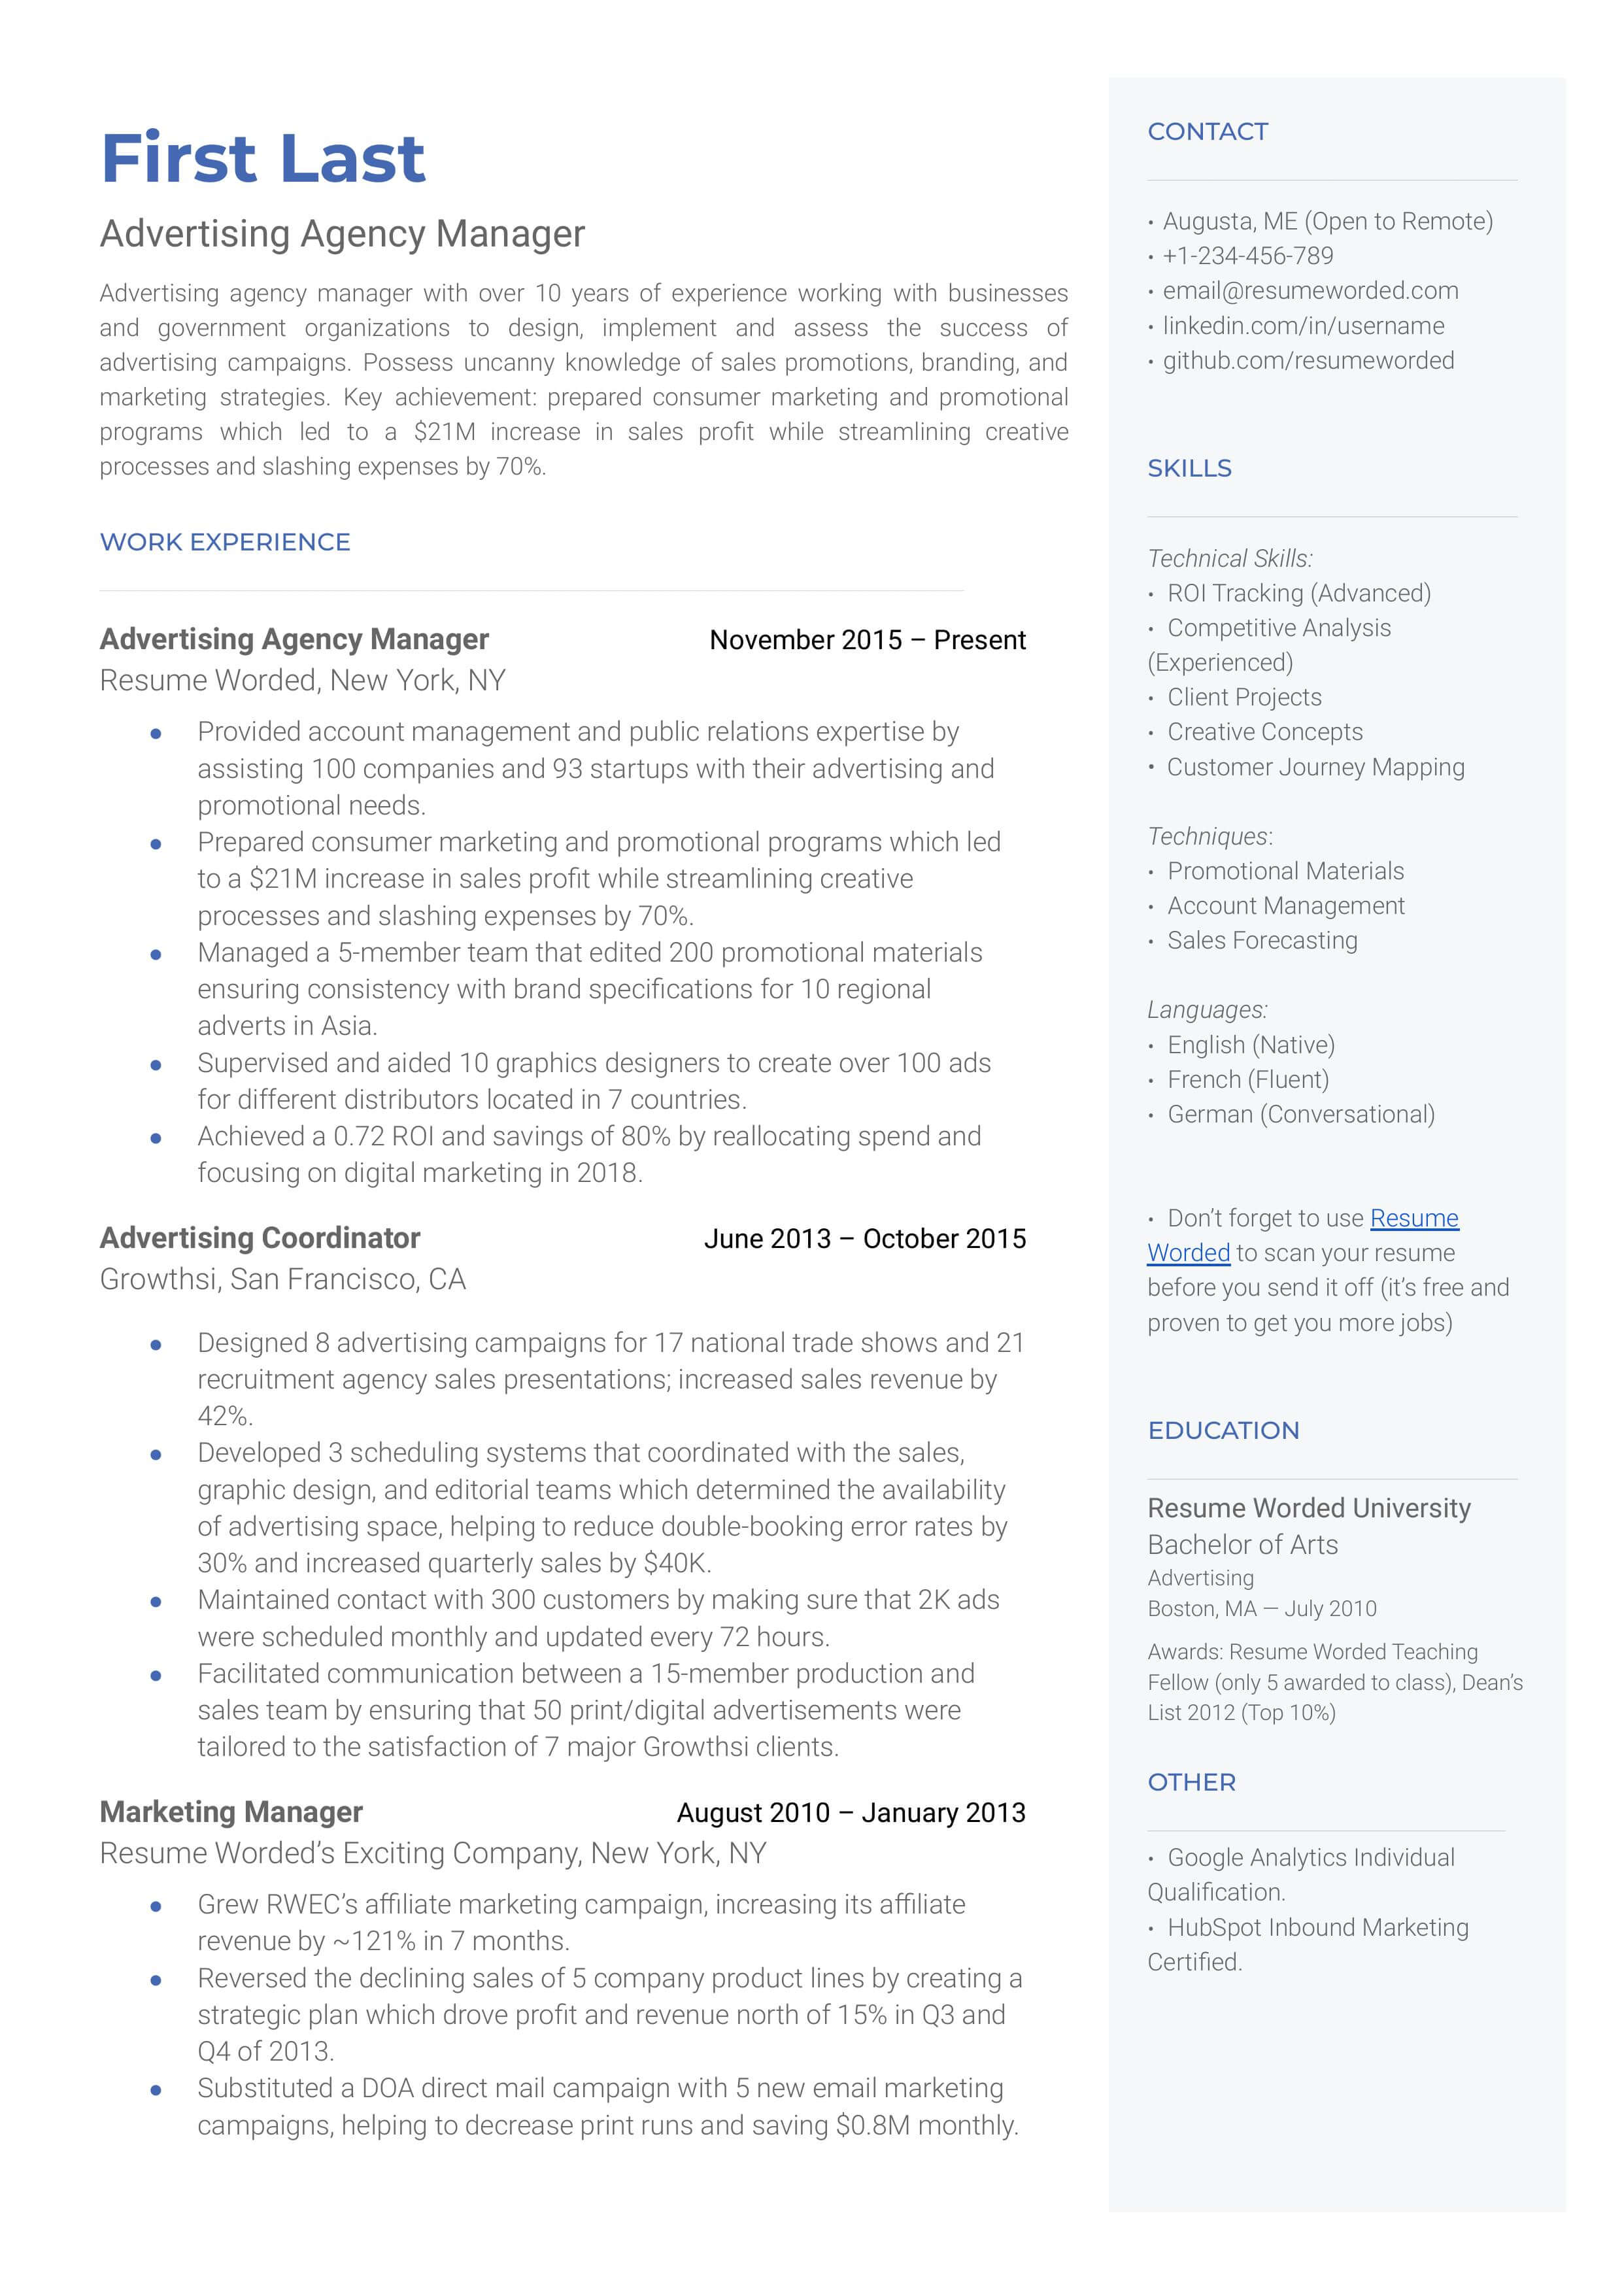 Advertising agency manager resume sample that highlights applicant's experience and extensive skill set.